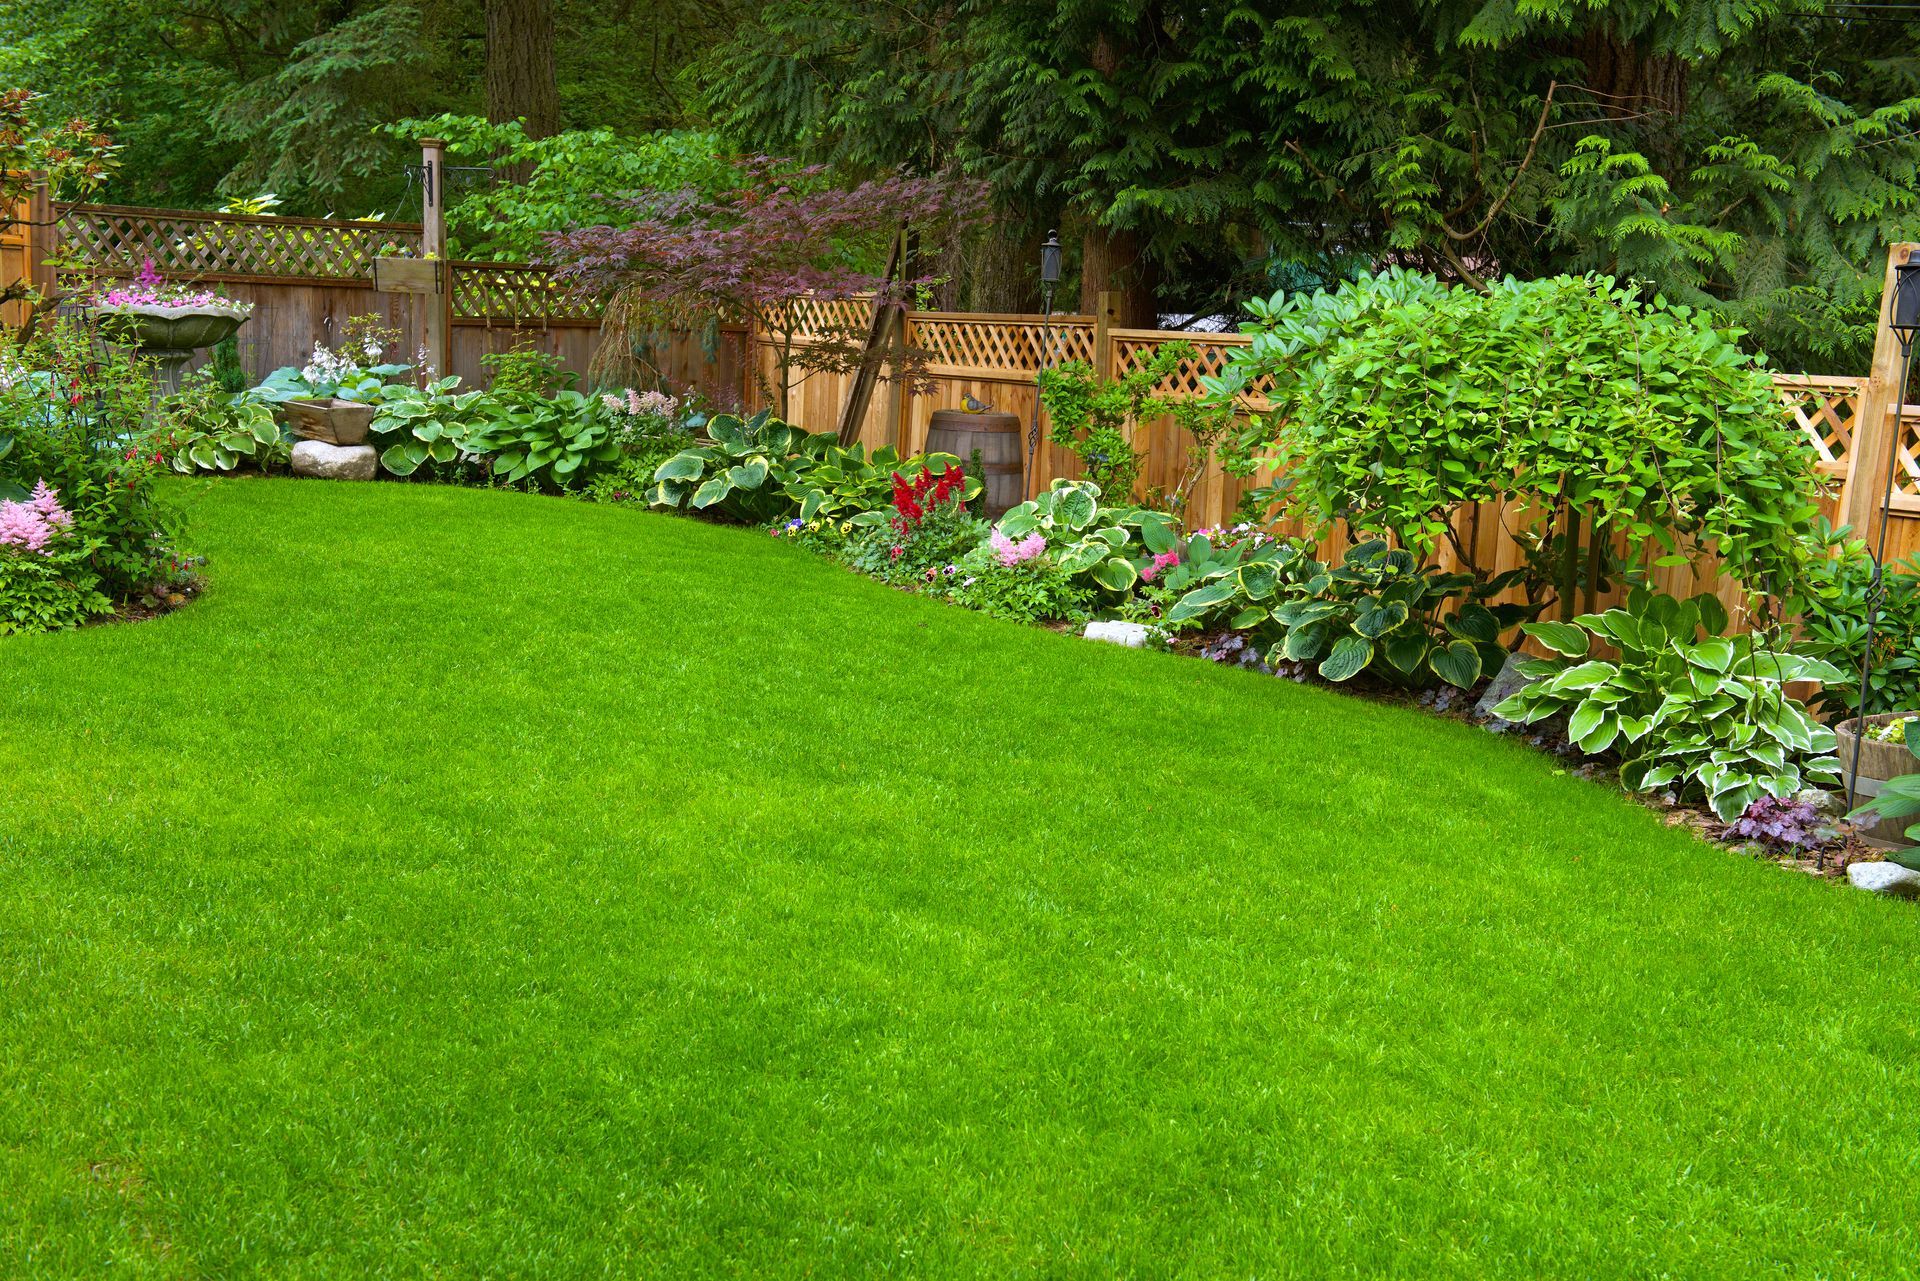 a lush green lawn in a backyard with a wooden fence and flowers .